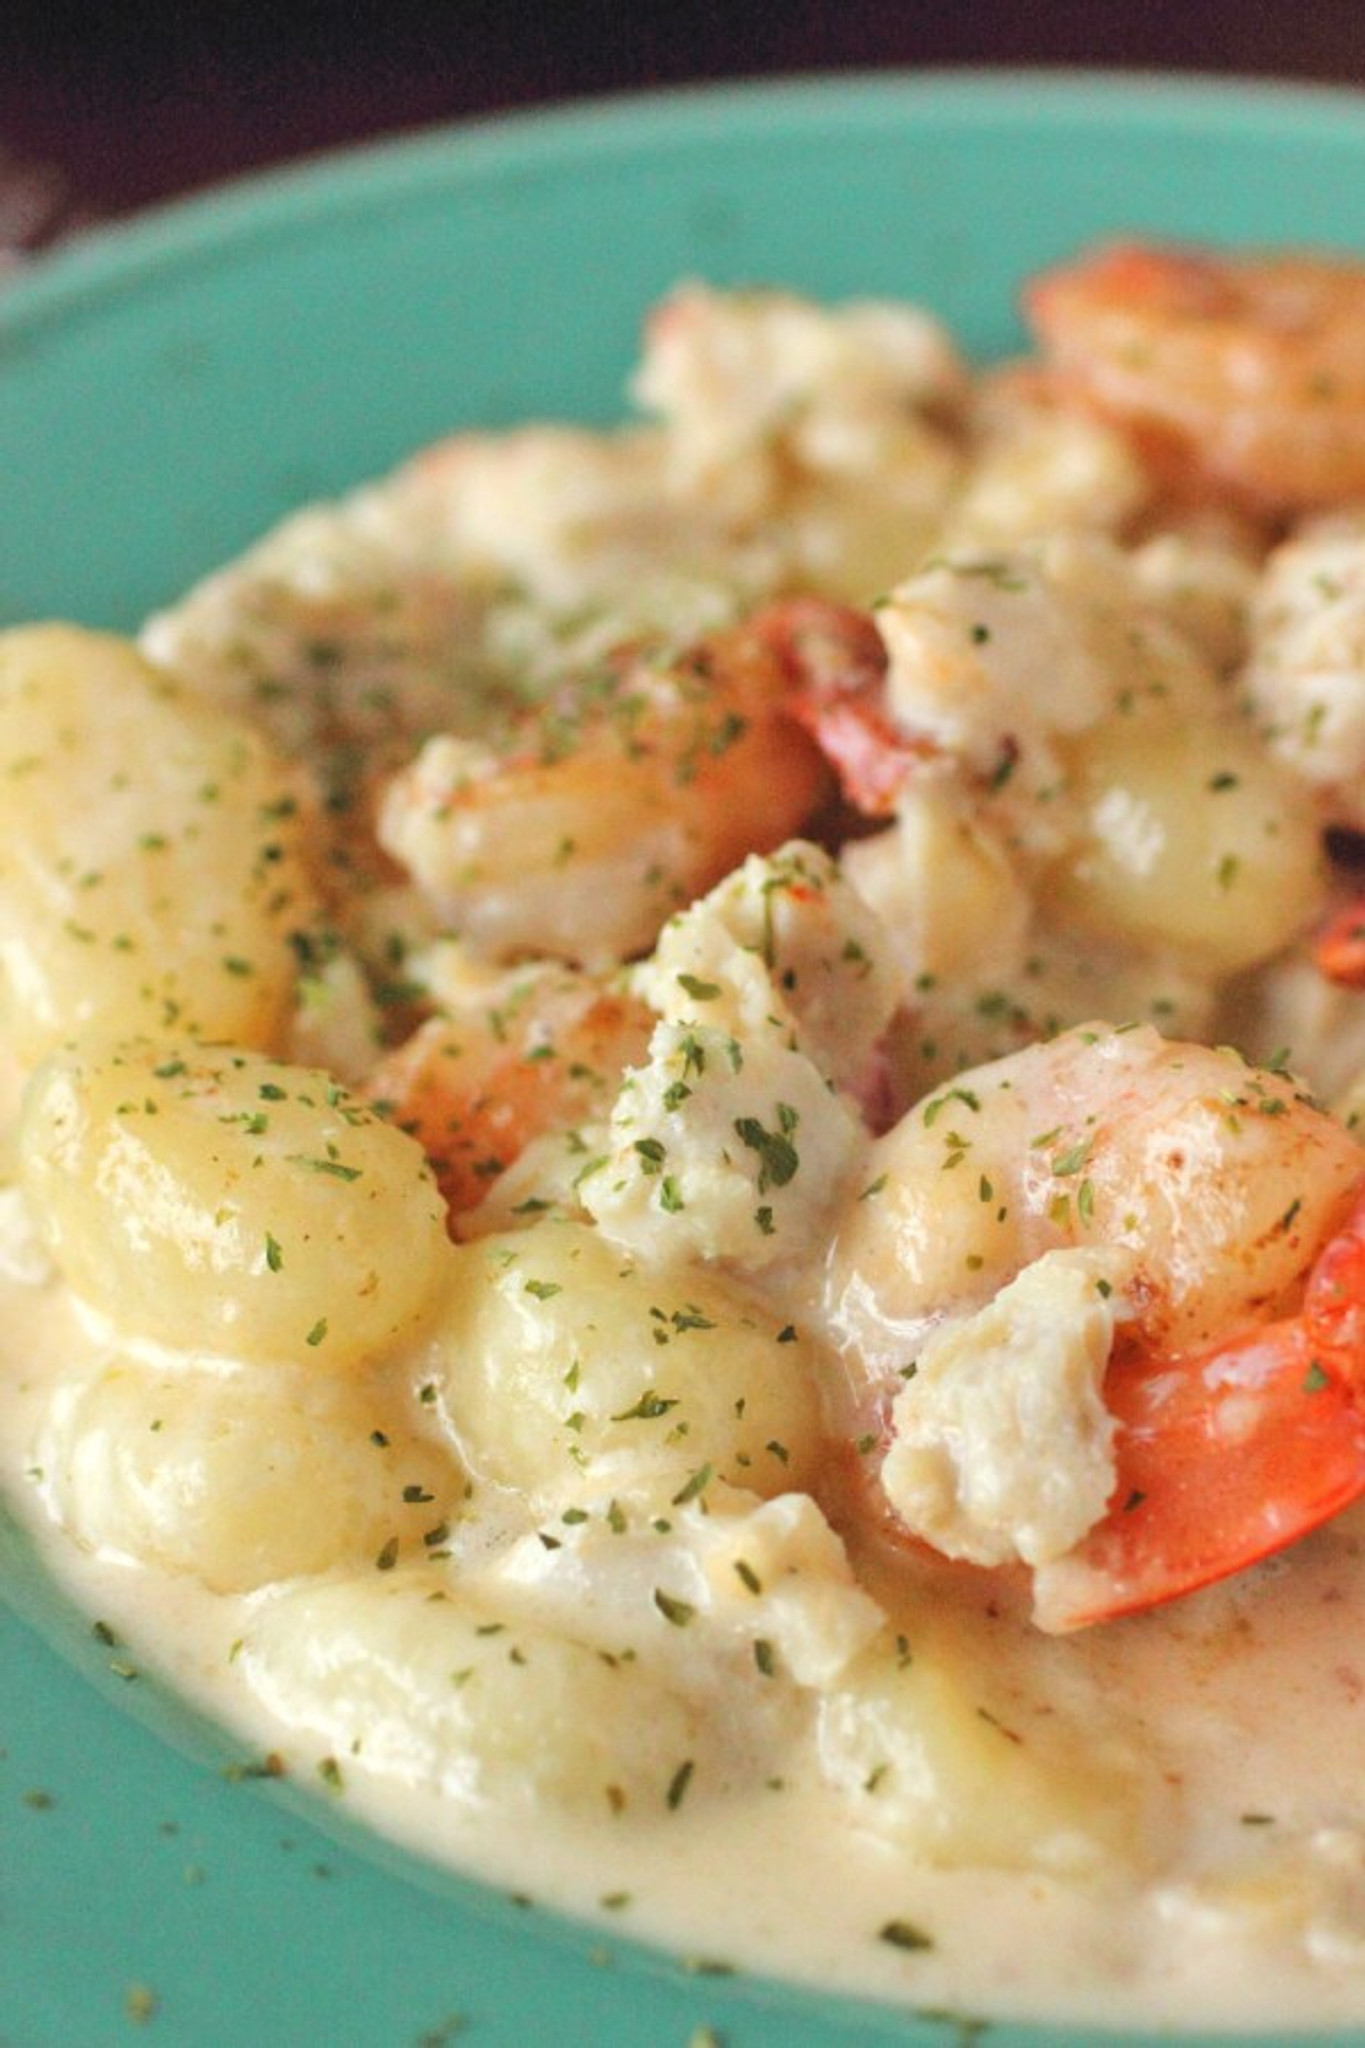 Seafood Gnocchi with White Wine Parmesan Sauce